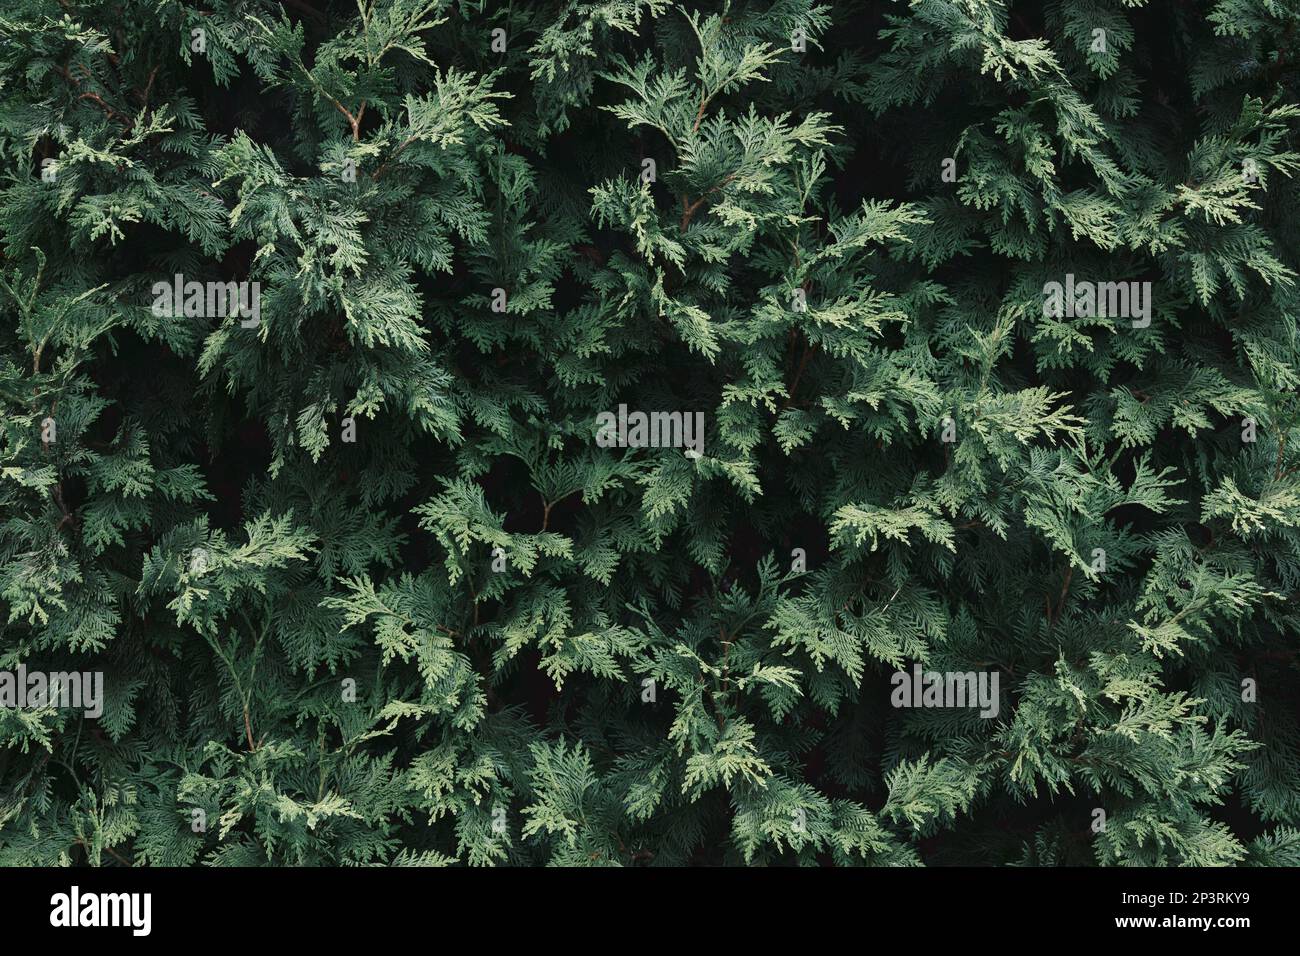 Background of thuja leaves. Thuja tree foliage, top view. Stock Photo